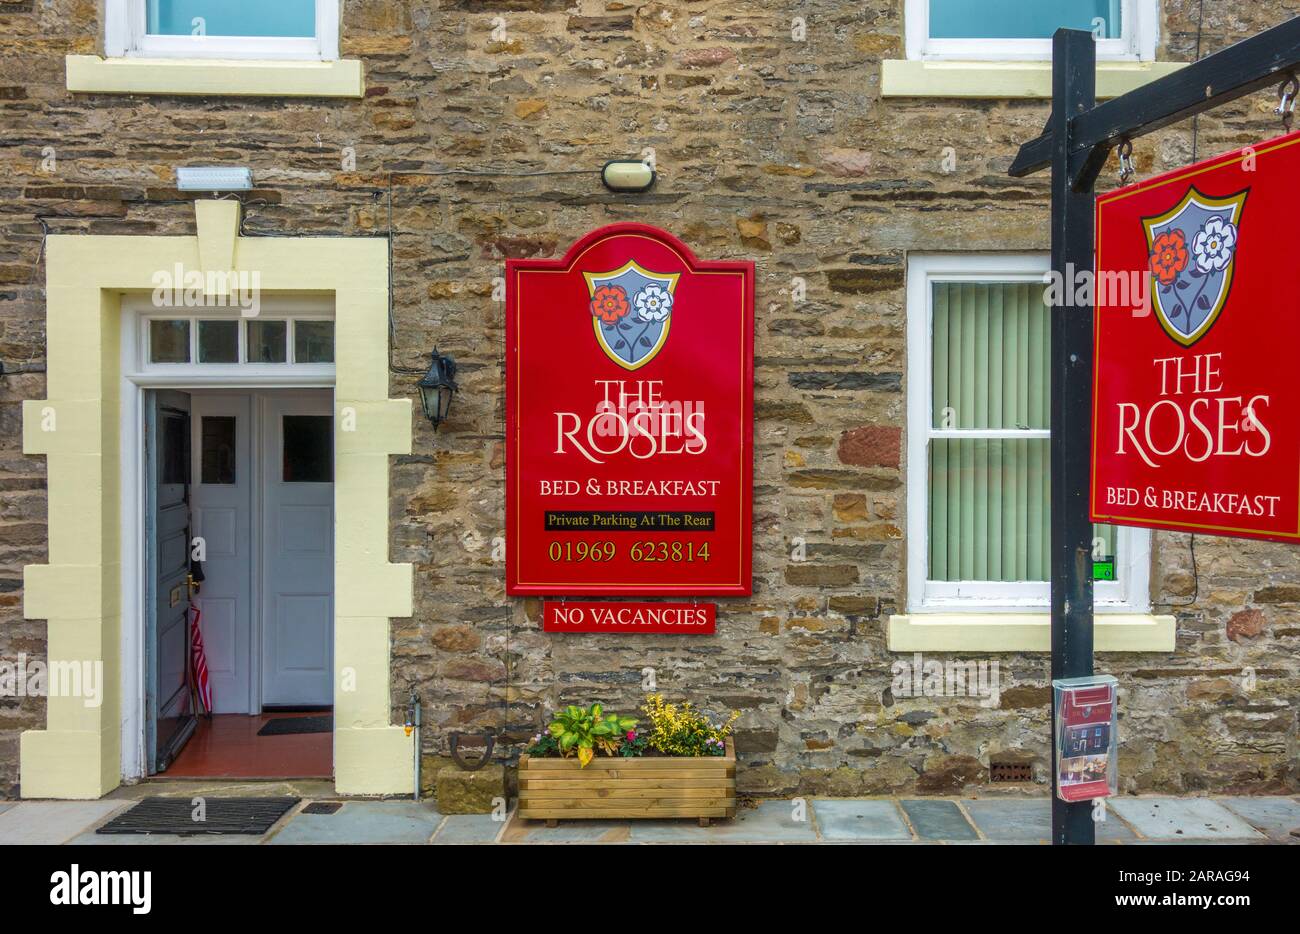 Outside and entrance to The Roses, a bed & breakfast establishment in the market town of Leyburn, in Richmondshire, North Yorkshire, England, UK. Stock Photo